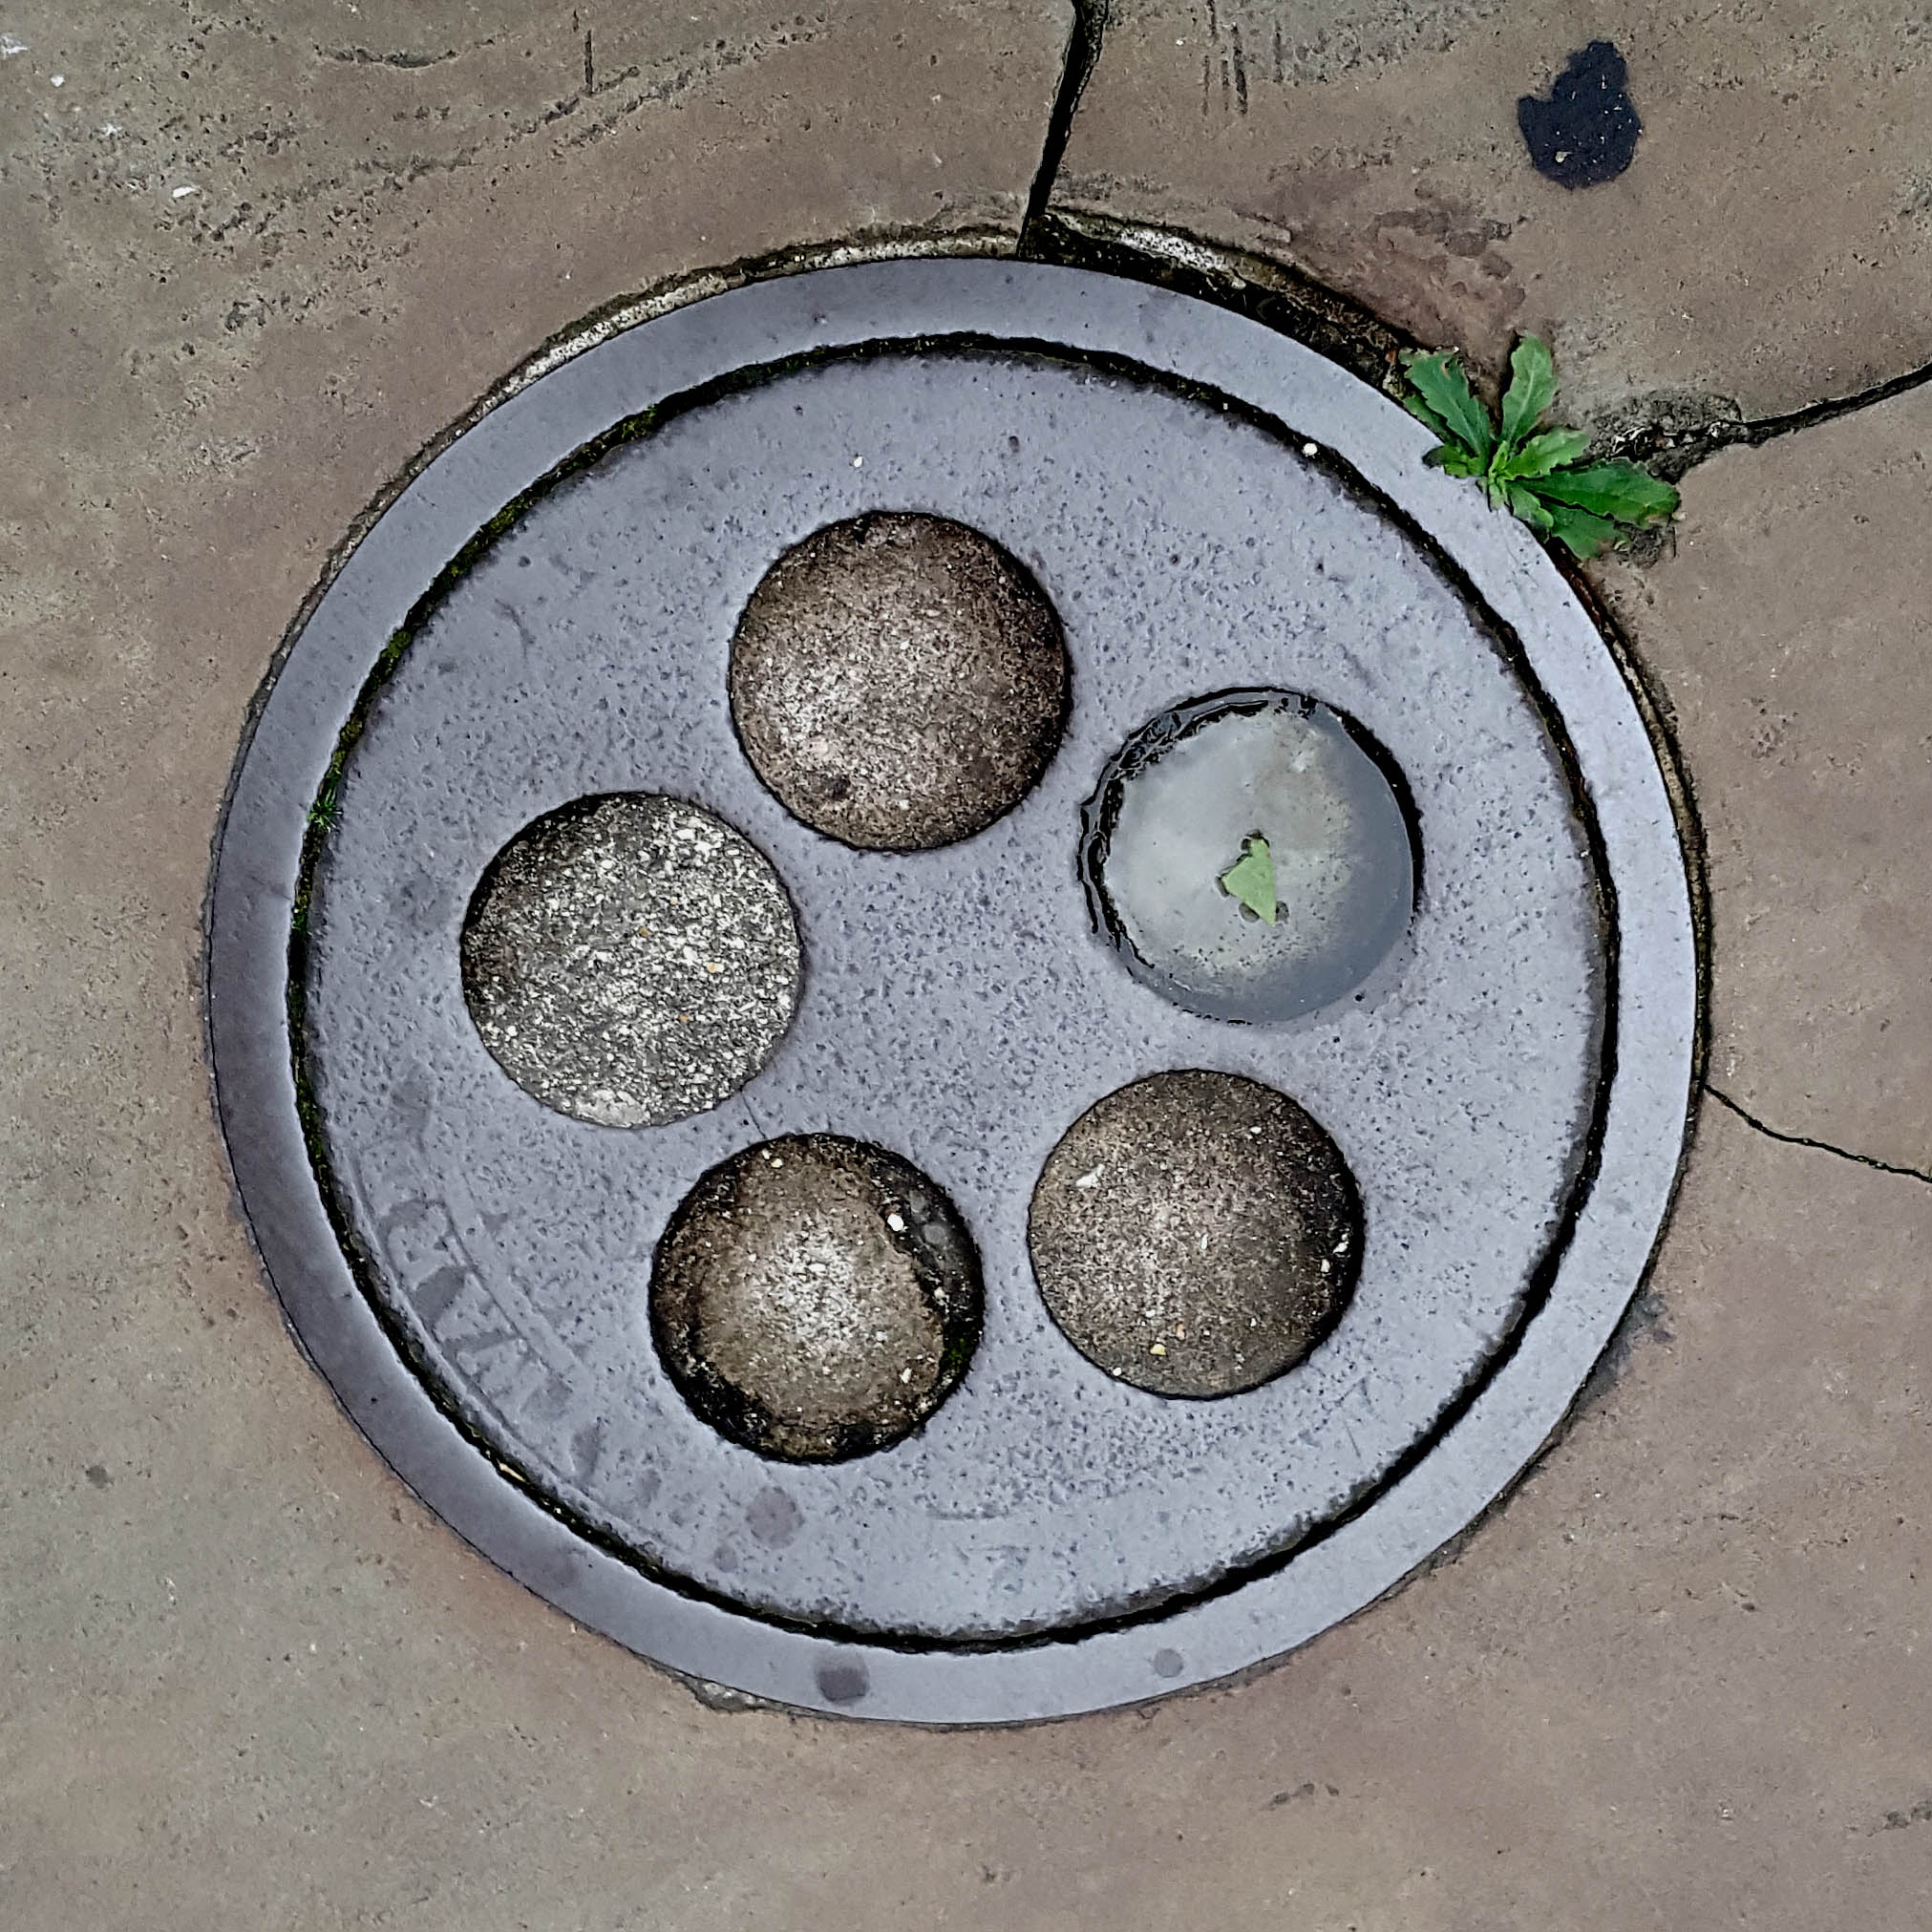 Manhole Cover, London - Cast iron with five circles of concrete and glass